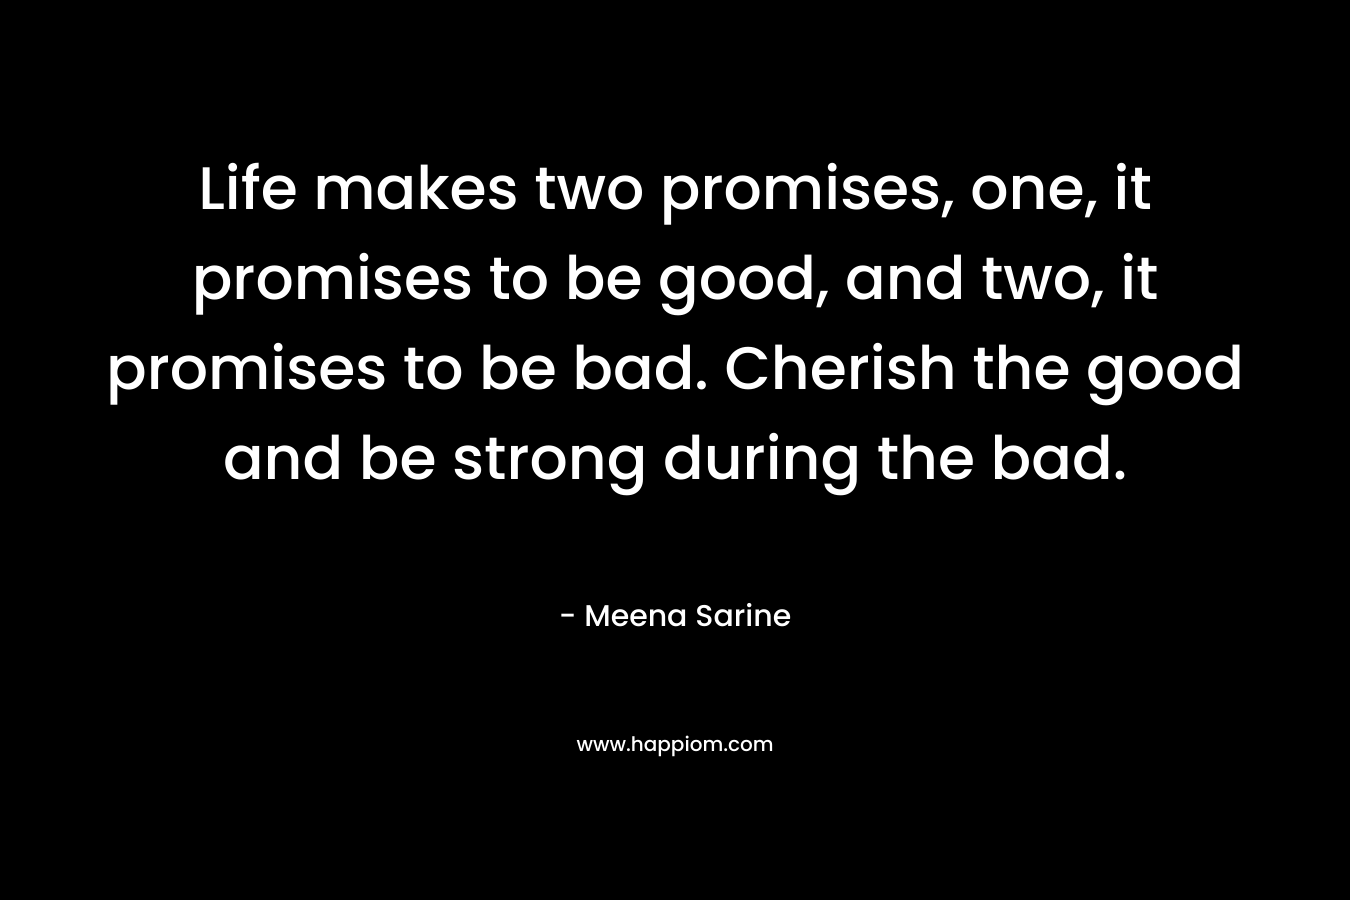 Life makes two promises, one, it promises to be good, and two, it promises to be bad. Cherish the good and be strong during the bad.